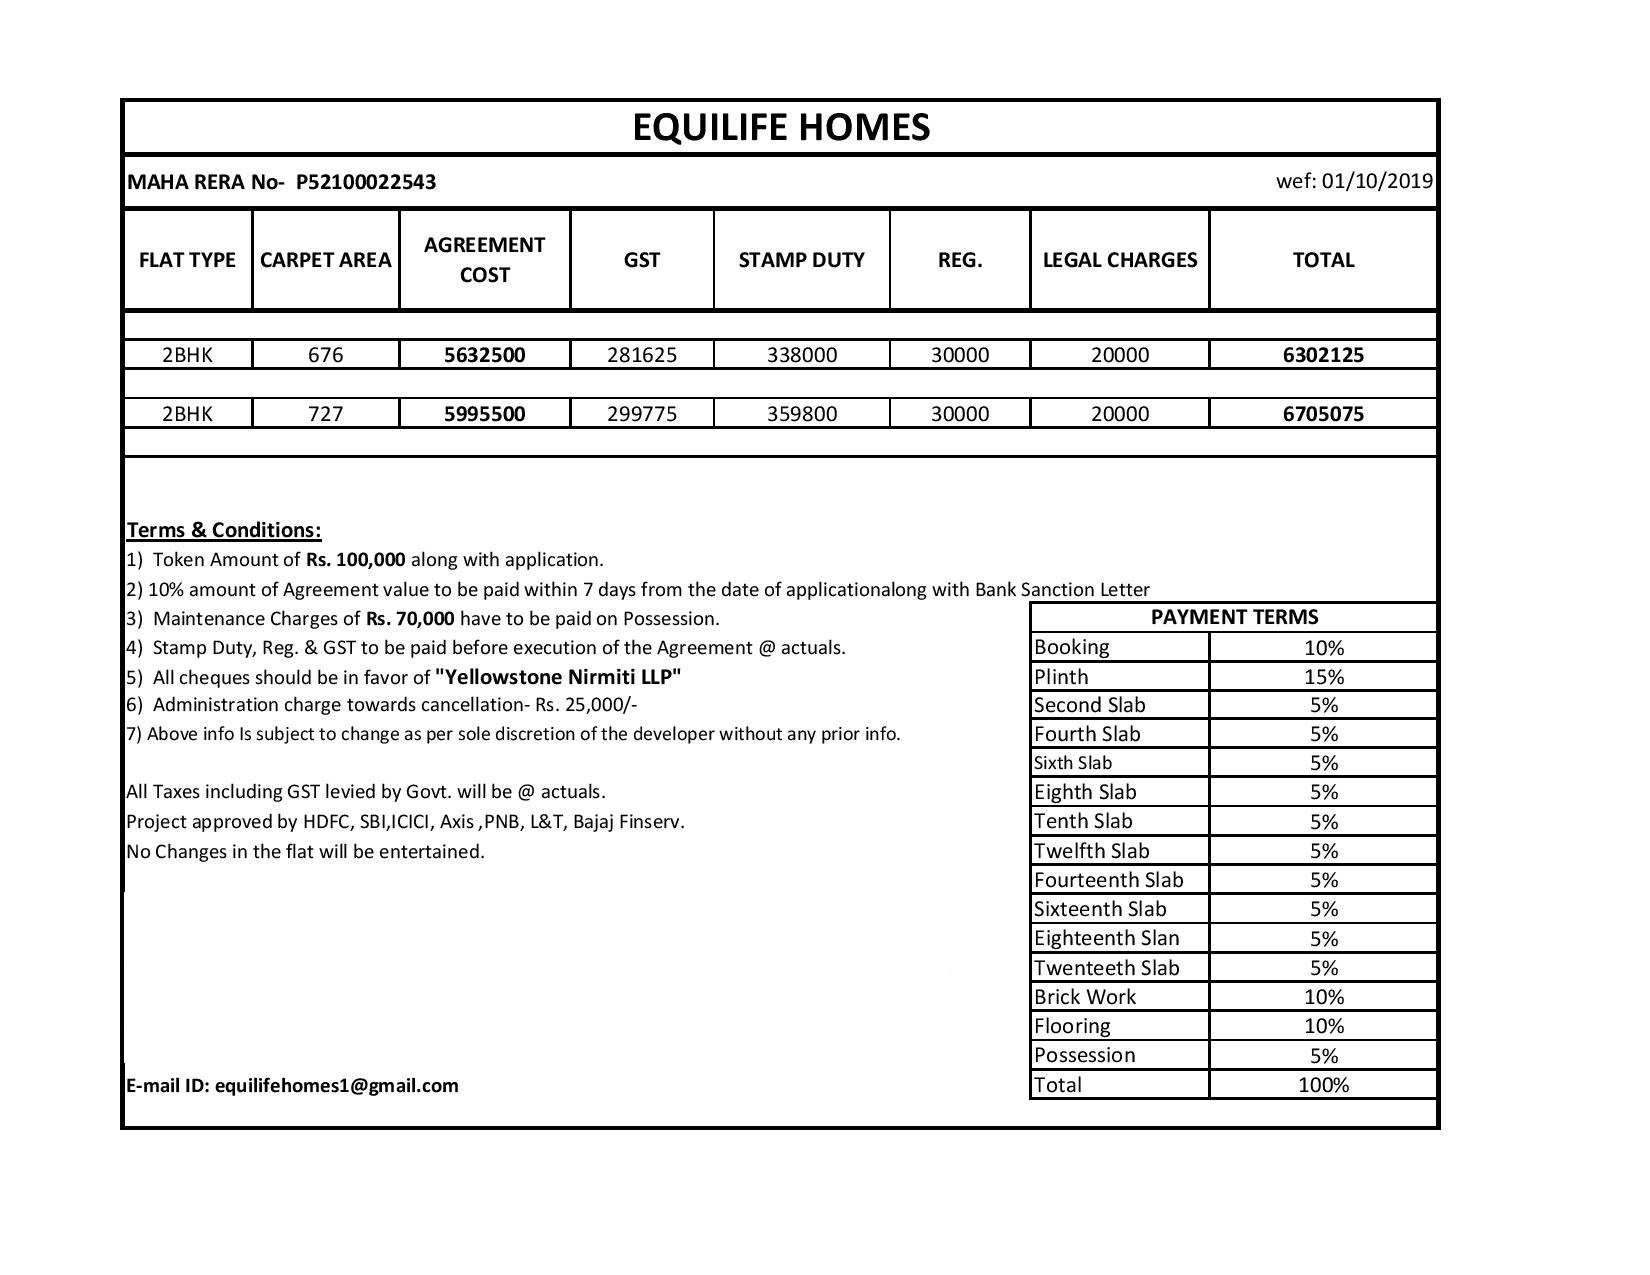 Pristine Equilife Homes Price List